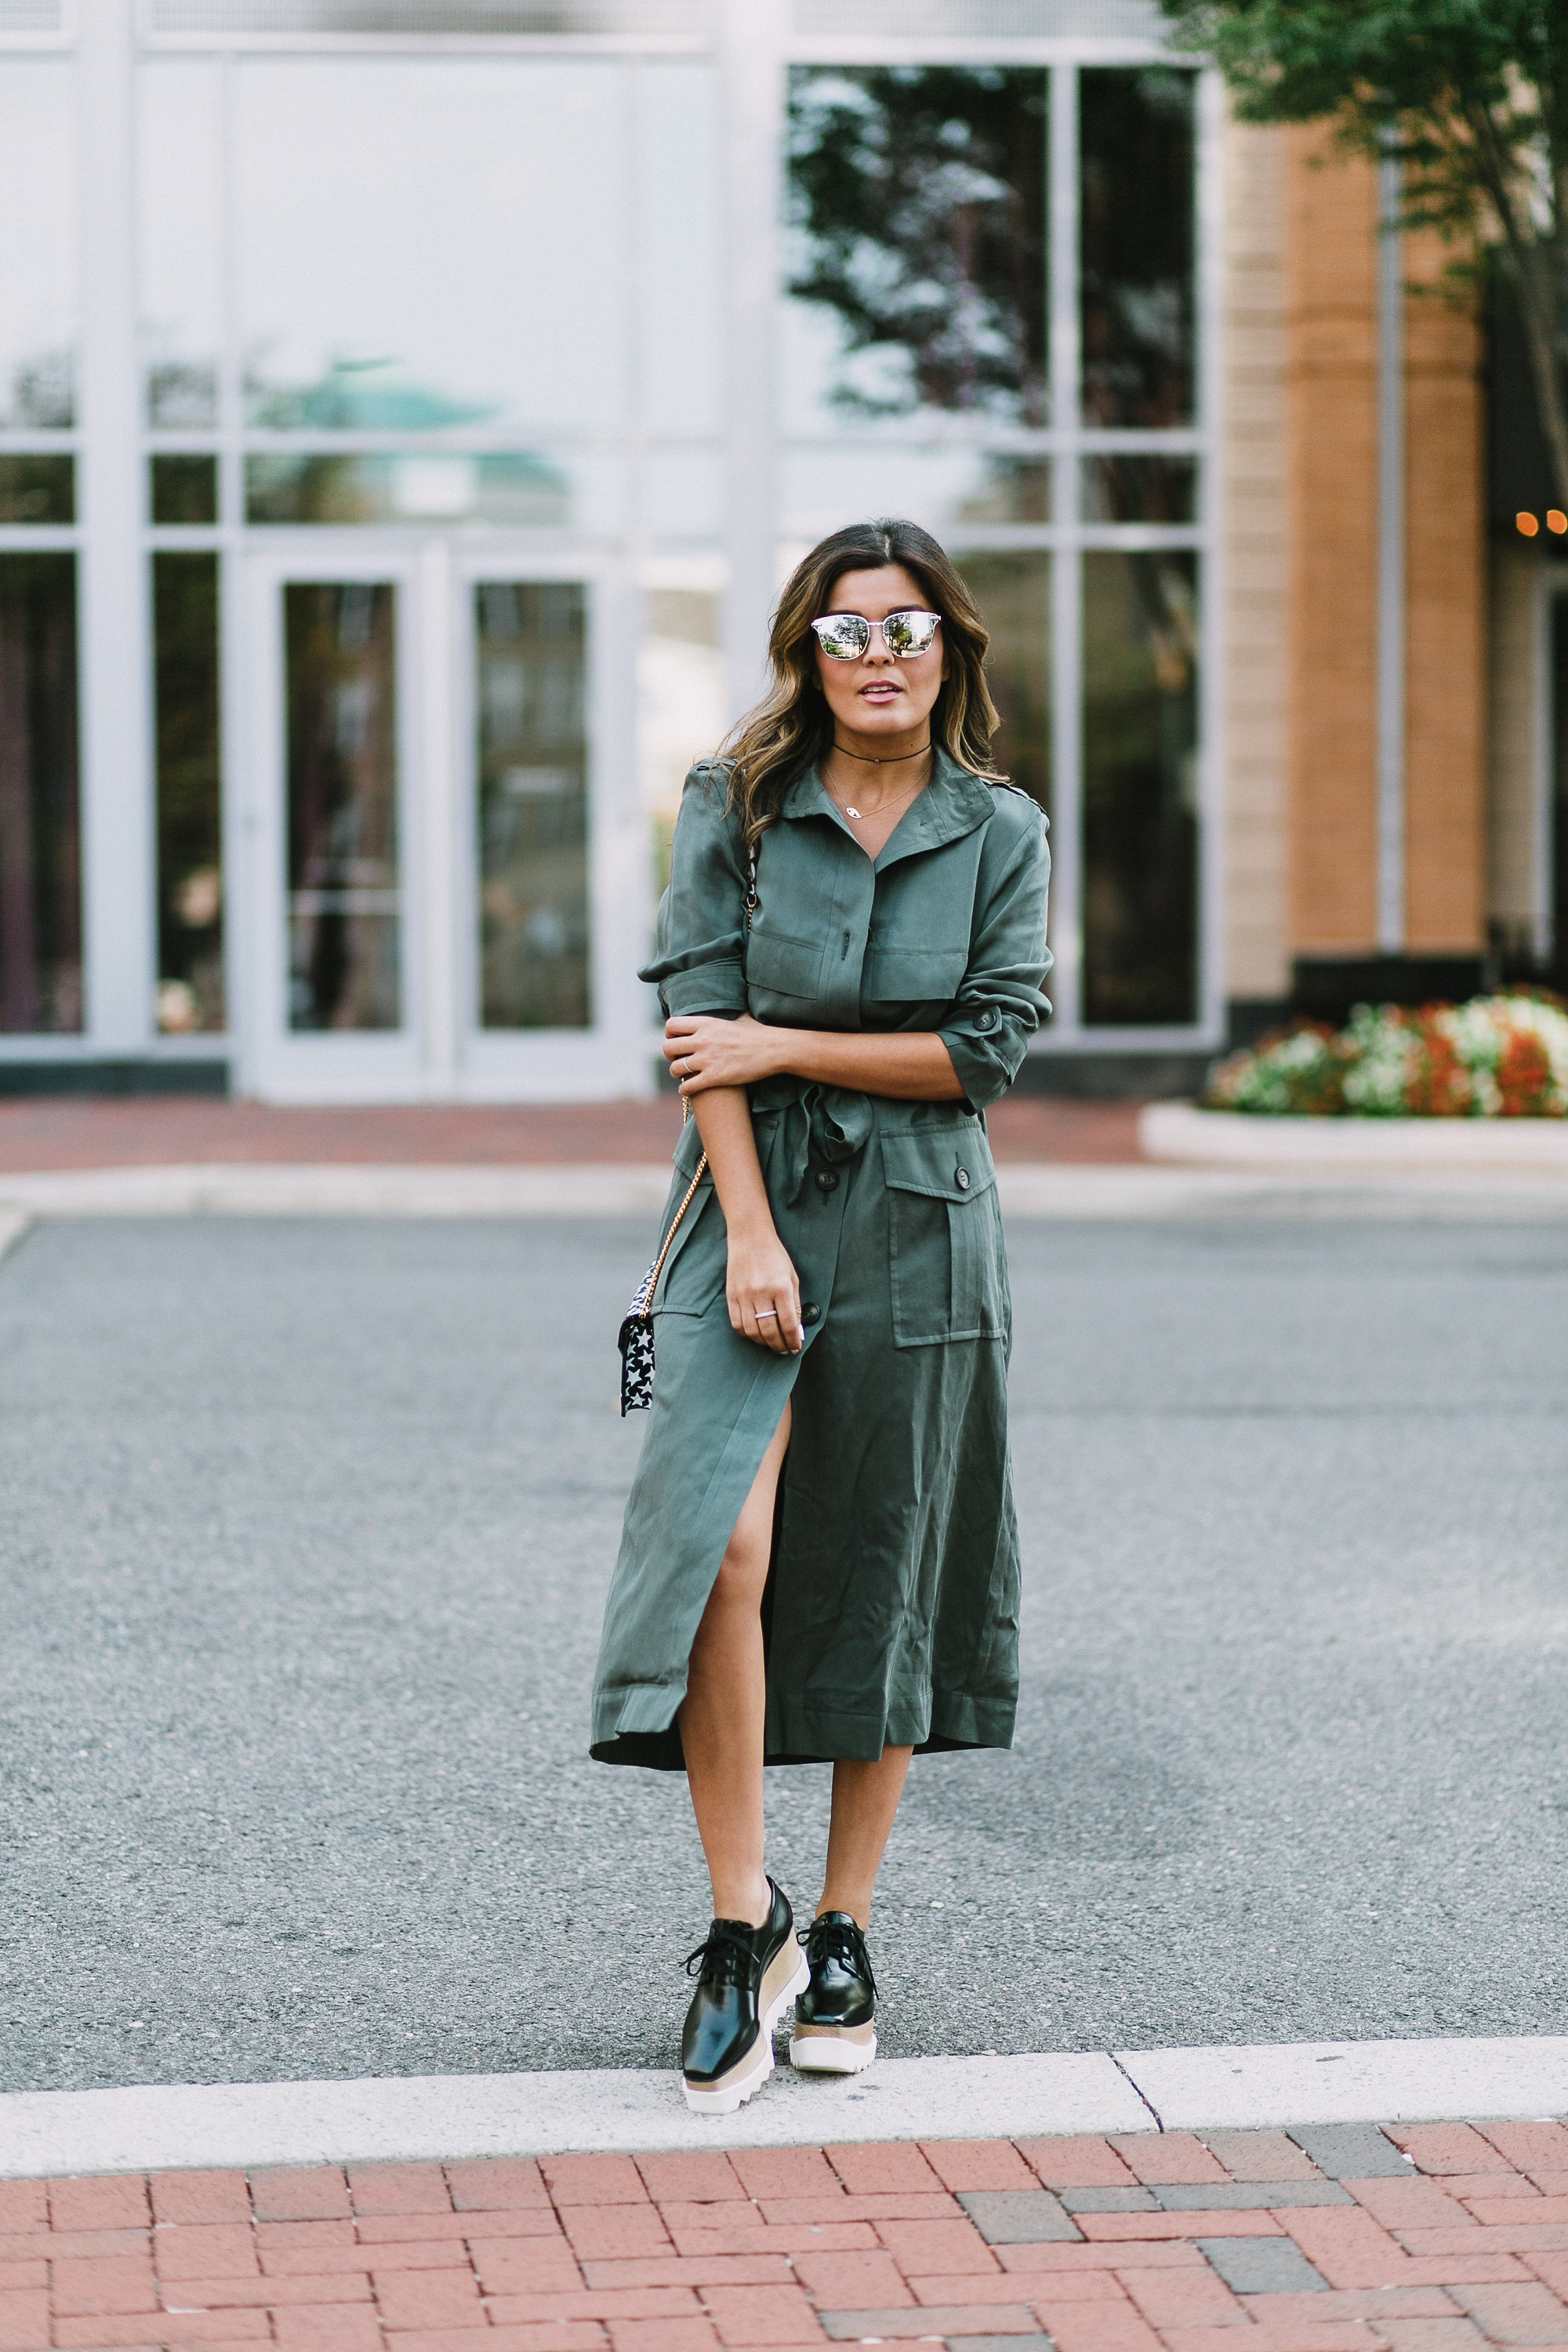 Style MBA wears Asos utility trench dress and stella mccartney oxfords